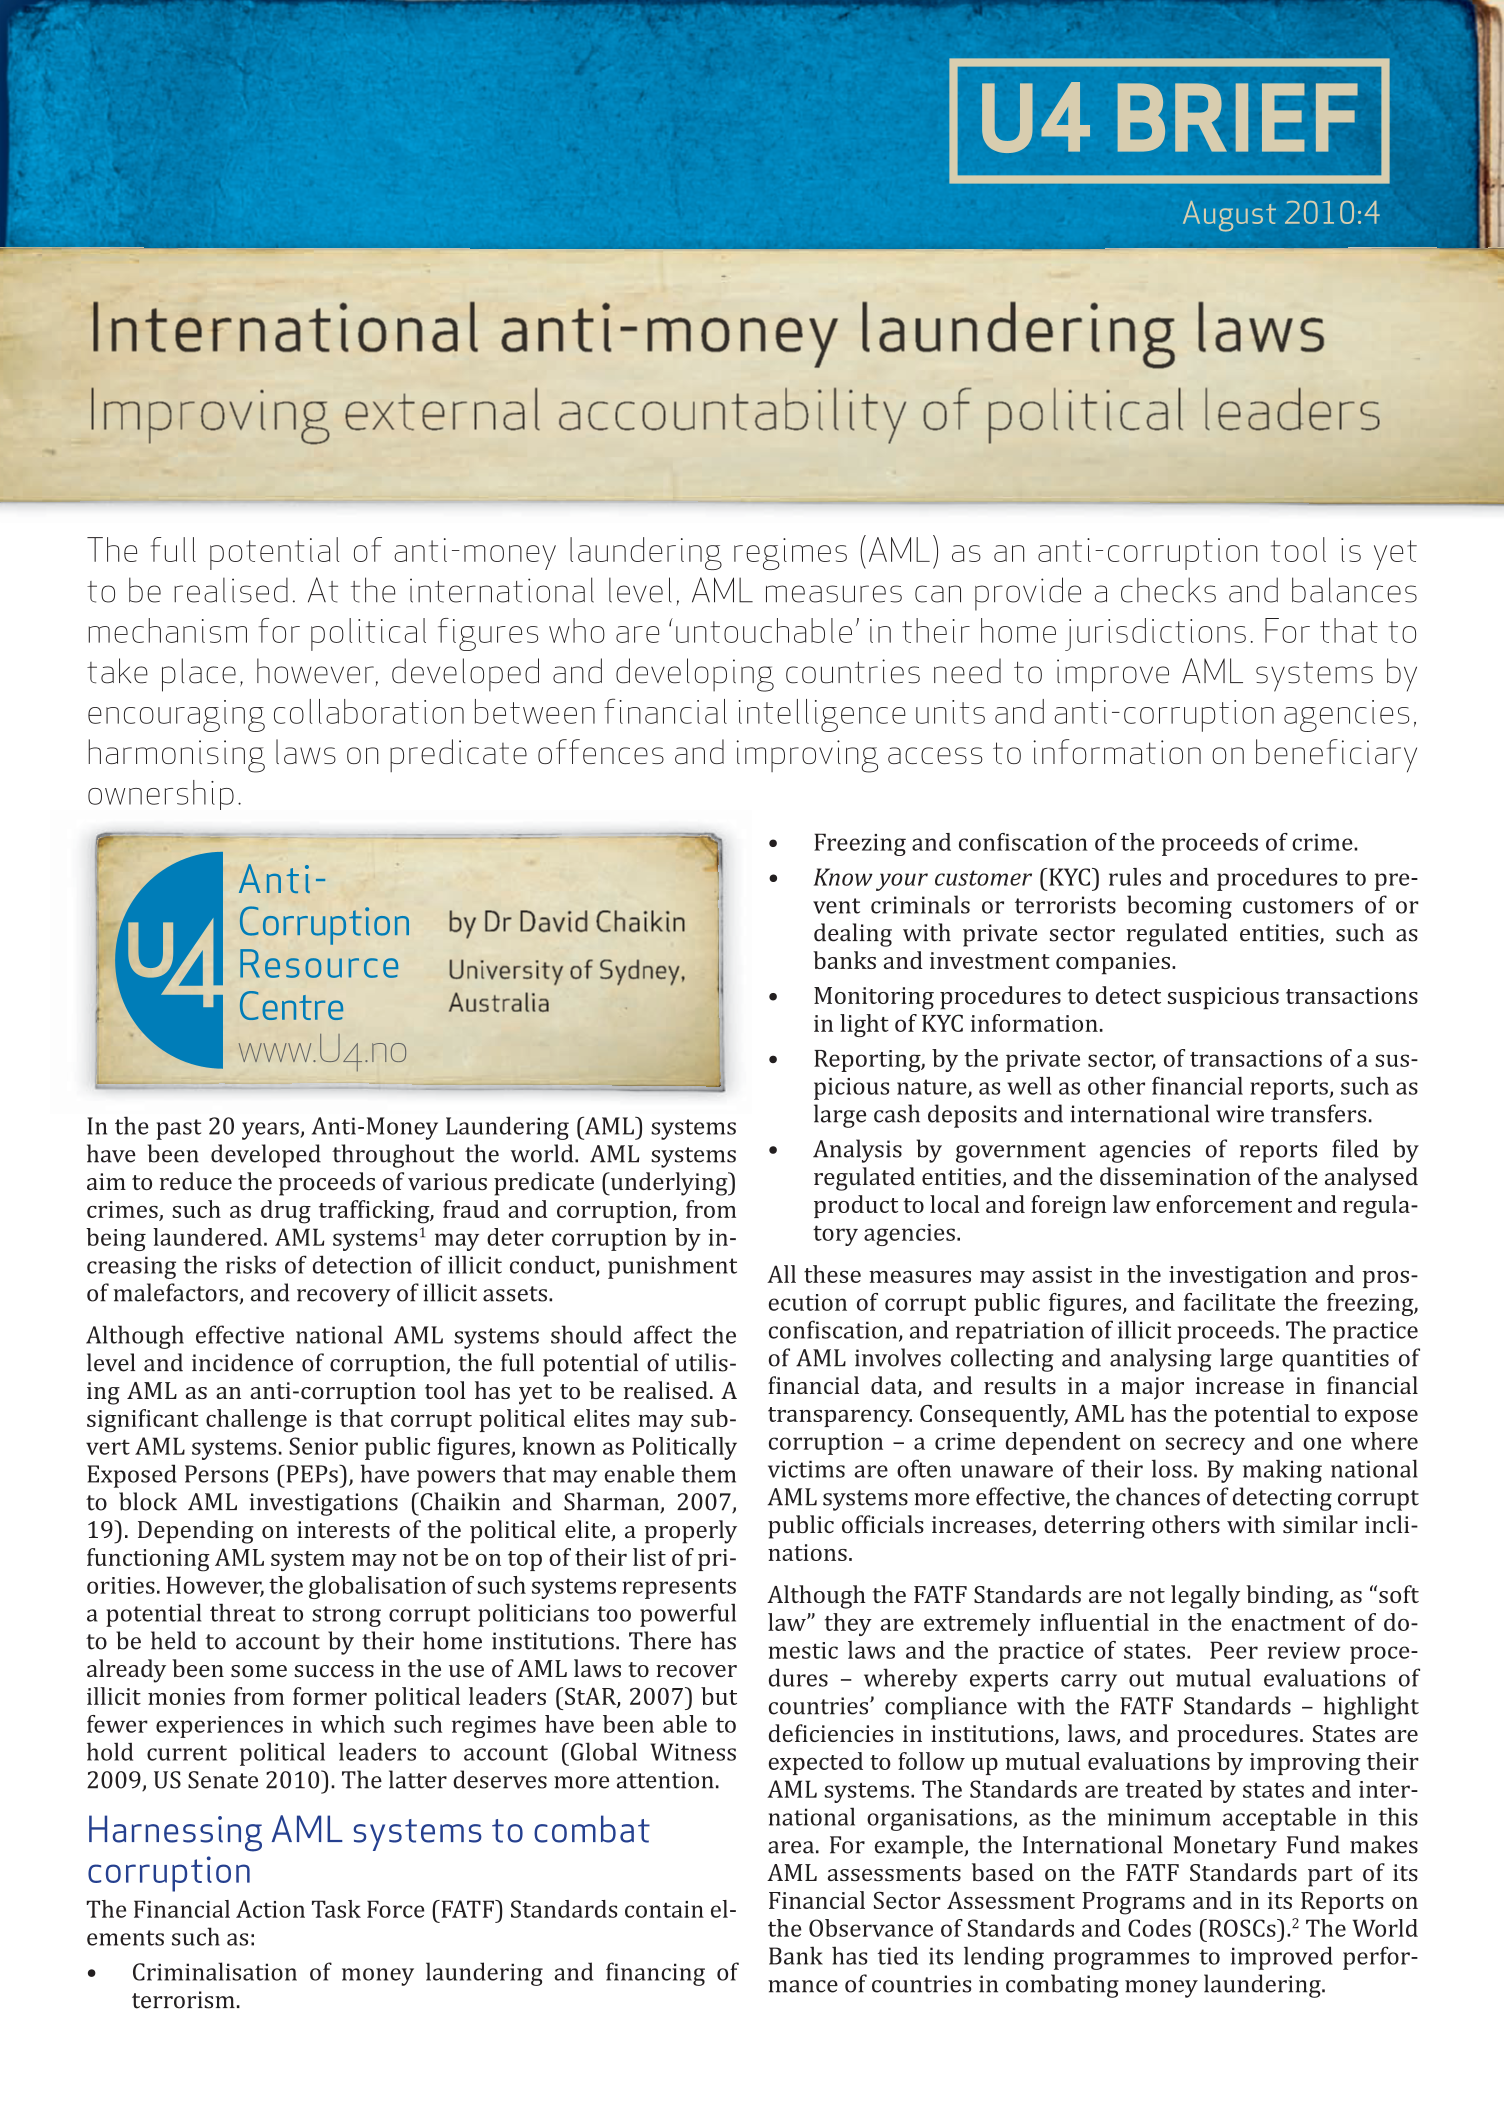 International anti-money laundering laws. Improving external accountability of political leaders